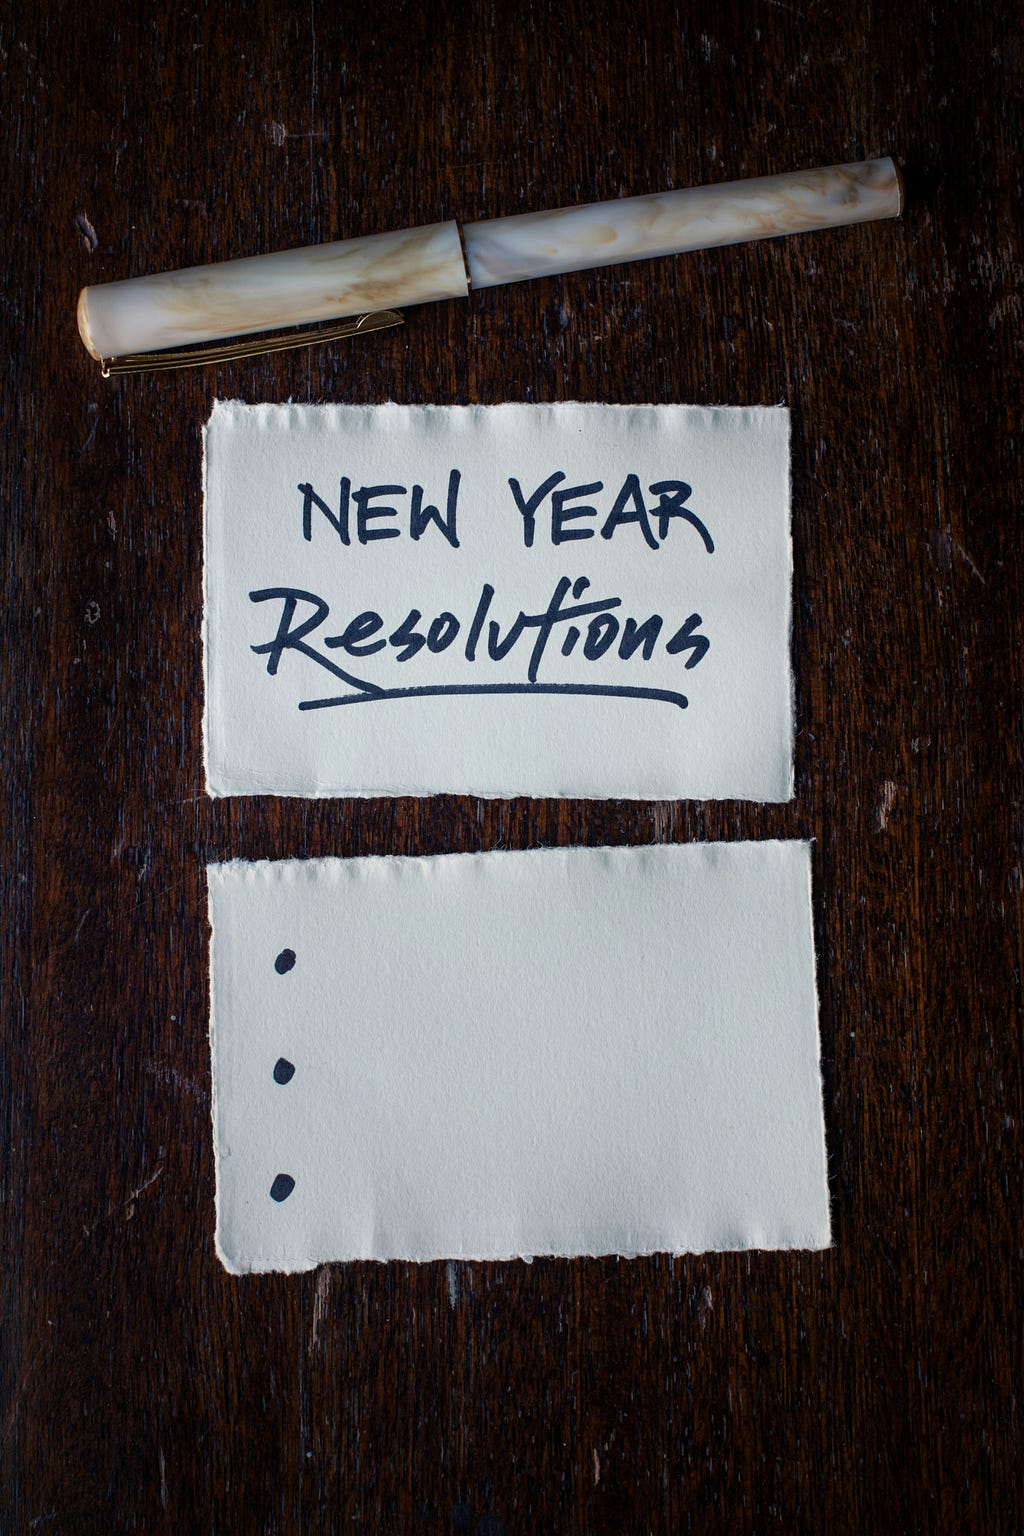 A picture of a pad and paper. The paper has a title of New Year`s resolutions